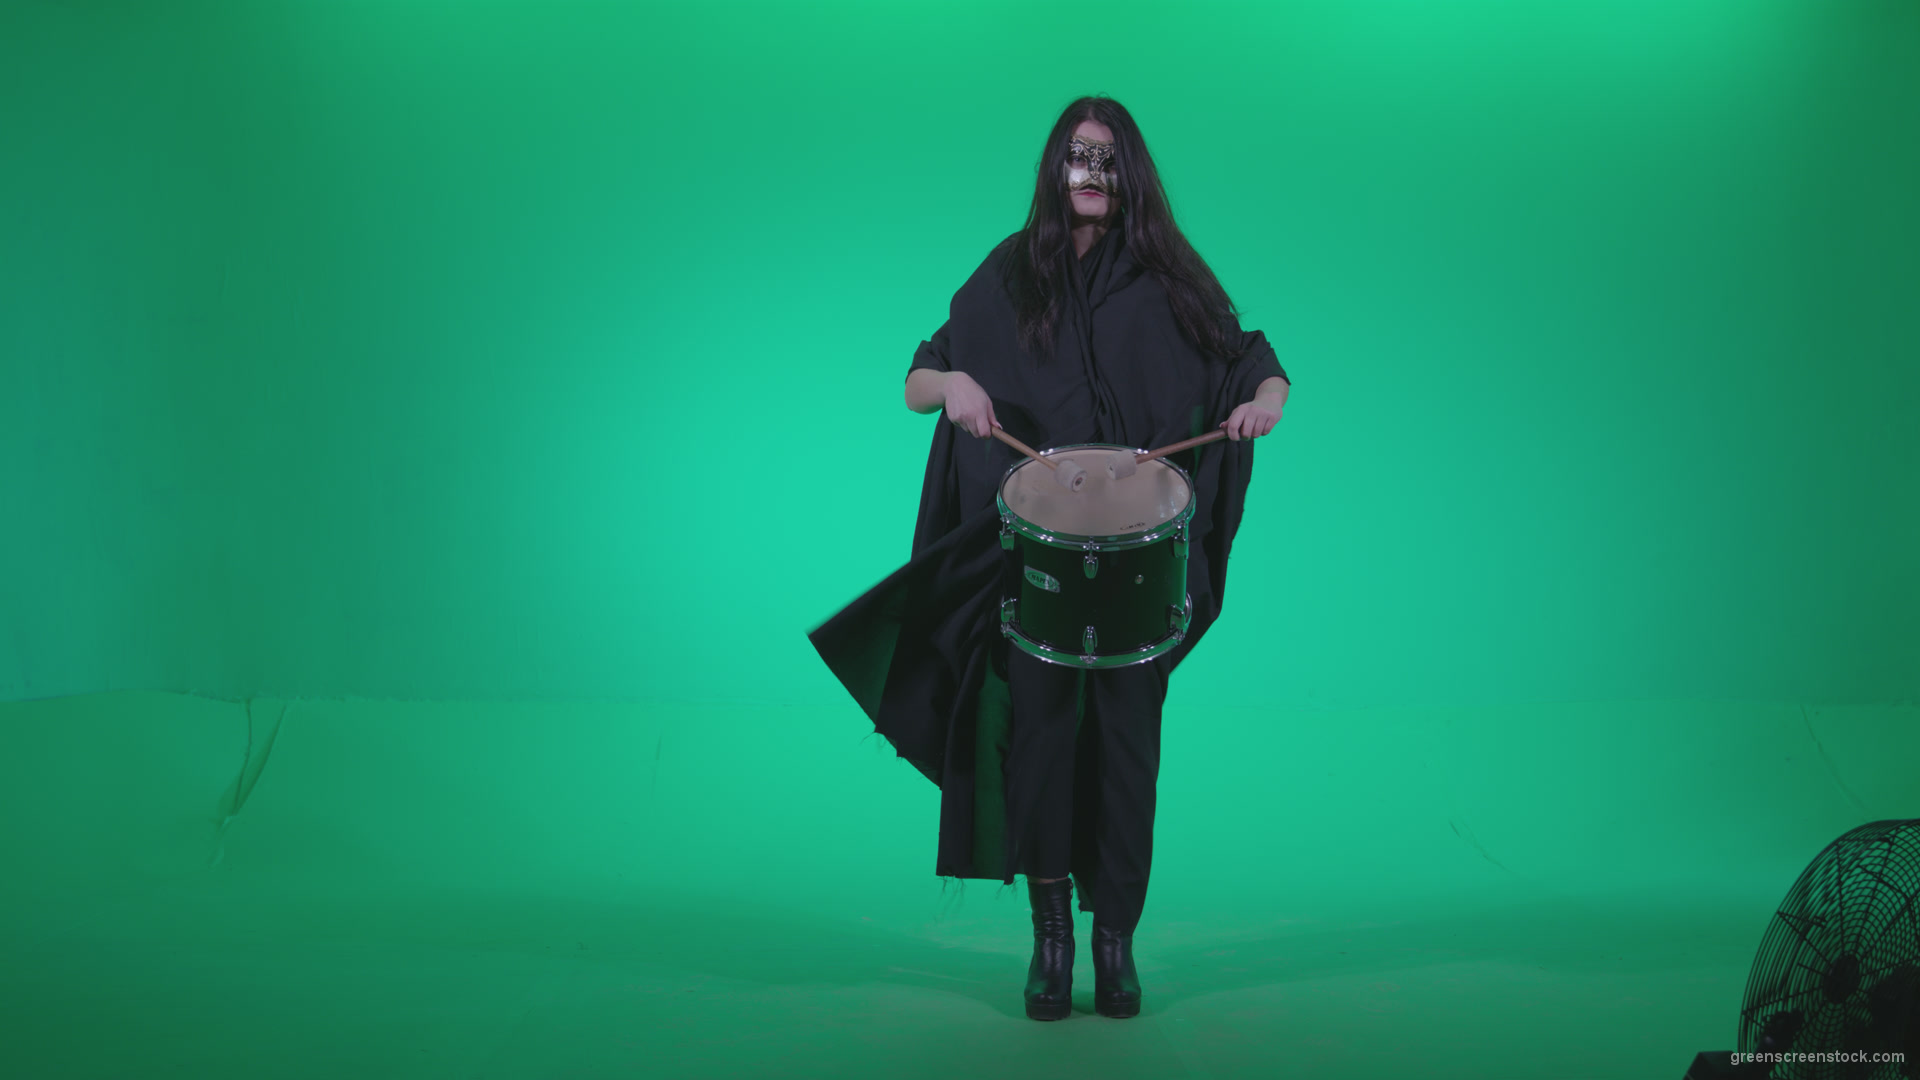 Gothic-Snare-Drumming-girl-g4_001 Green Screen Stock